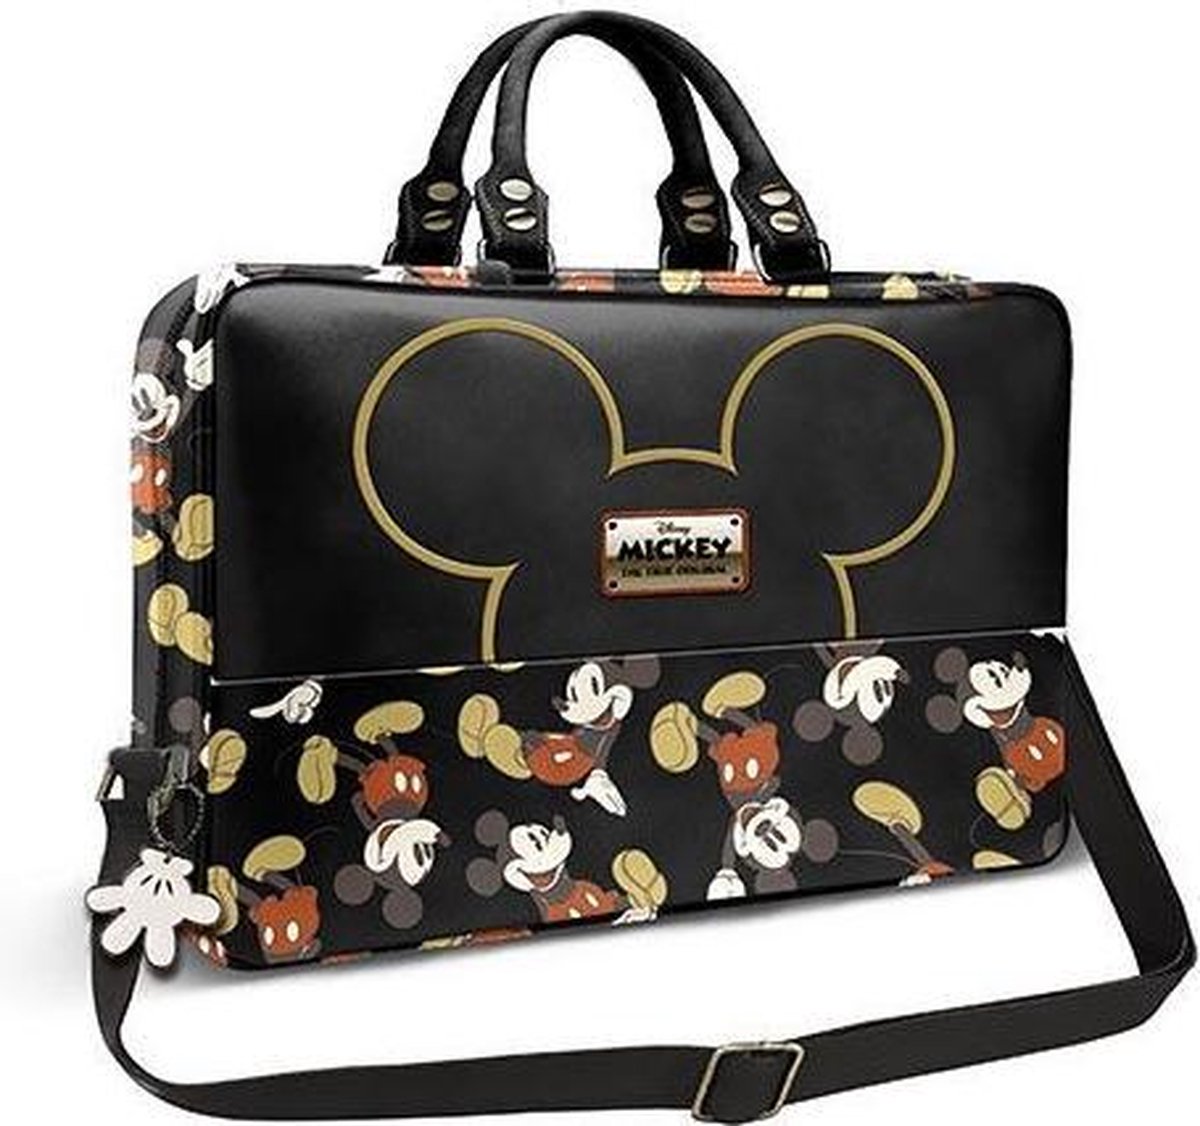 Mickey Mouse Schoudertas, Buy Now, Deals, 54% OFF, playgrowned.com